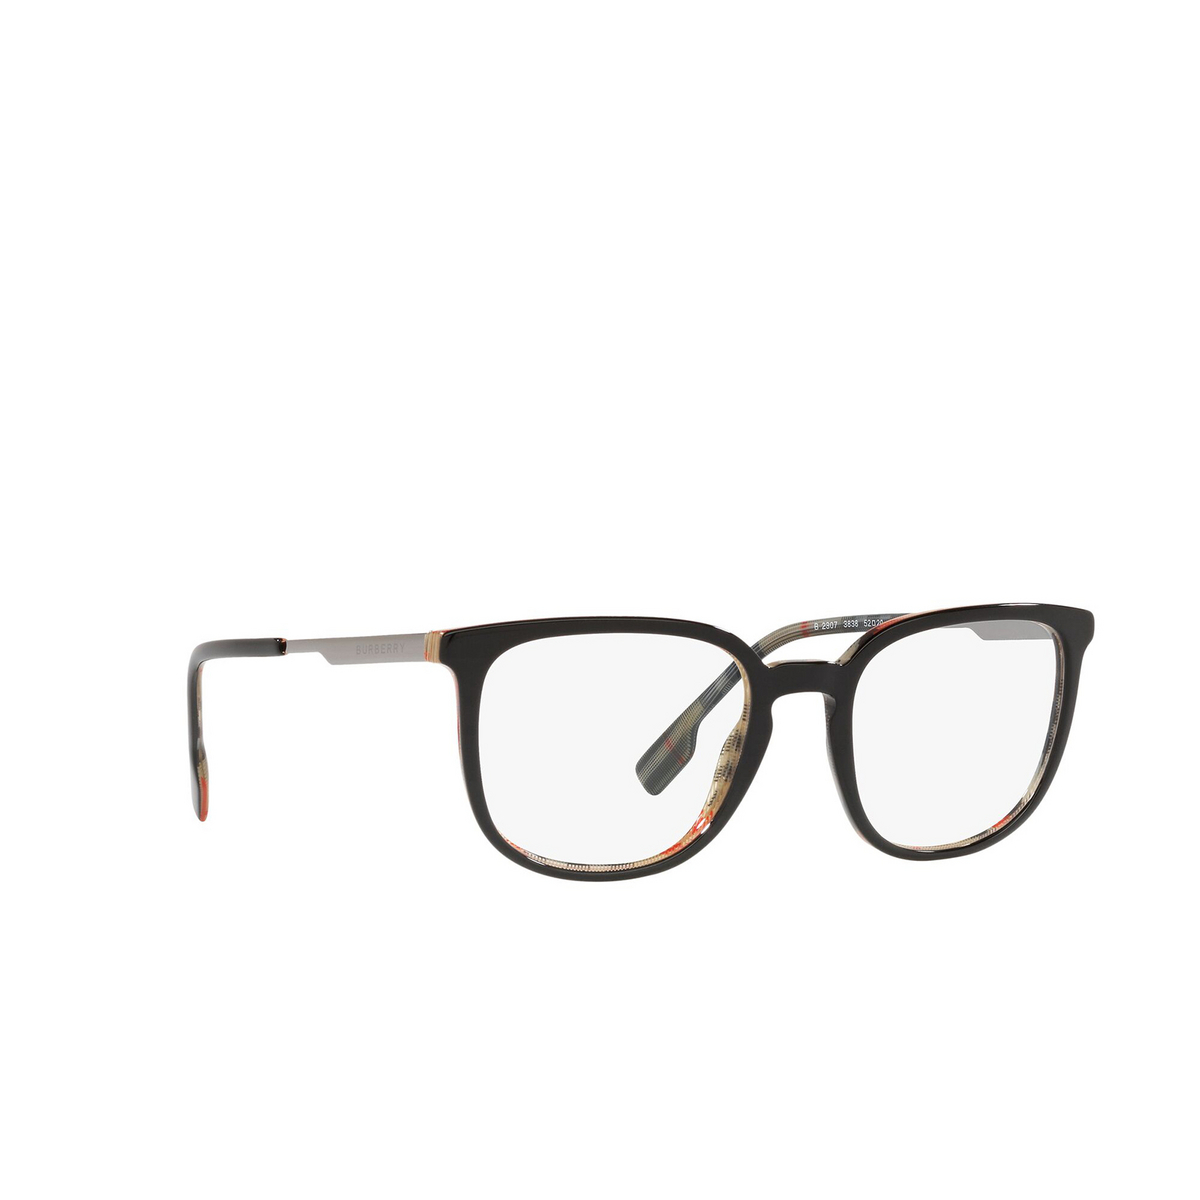 Burberry® Square Eyeglasses: Compton BE2307 color Top Black On Vintage Check 3838 - three-quarters view.